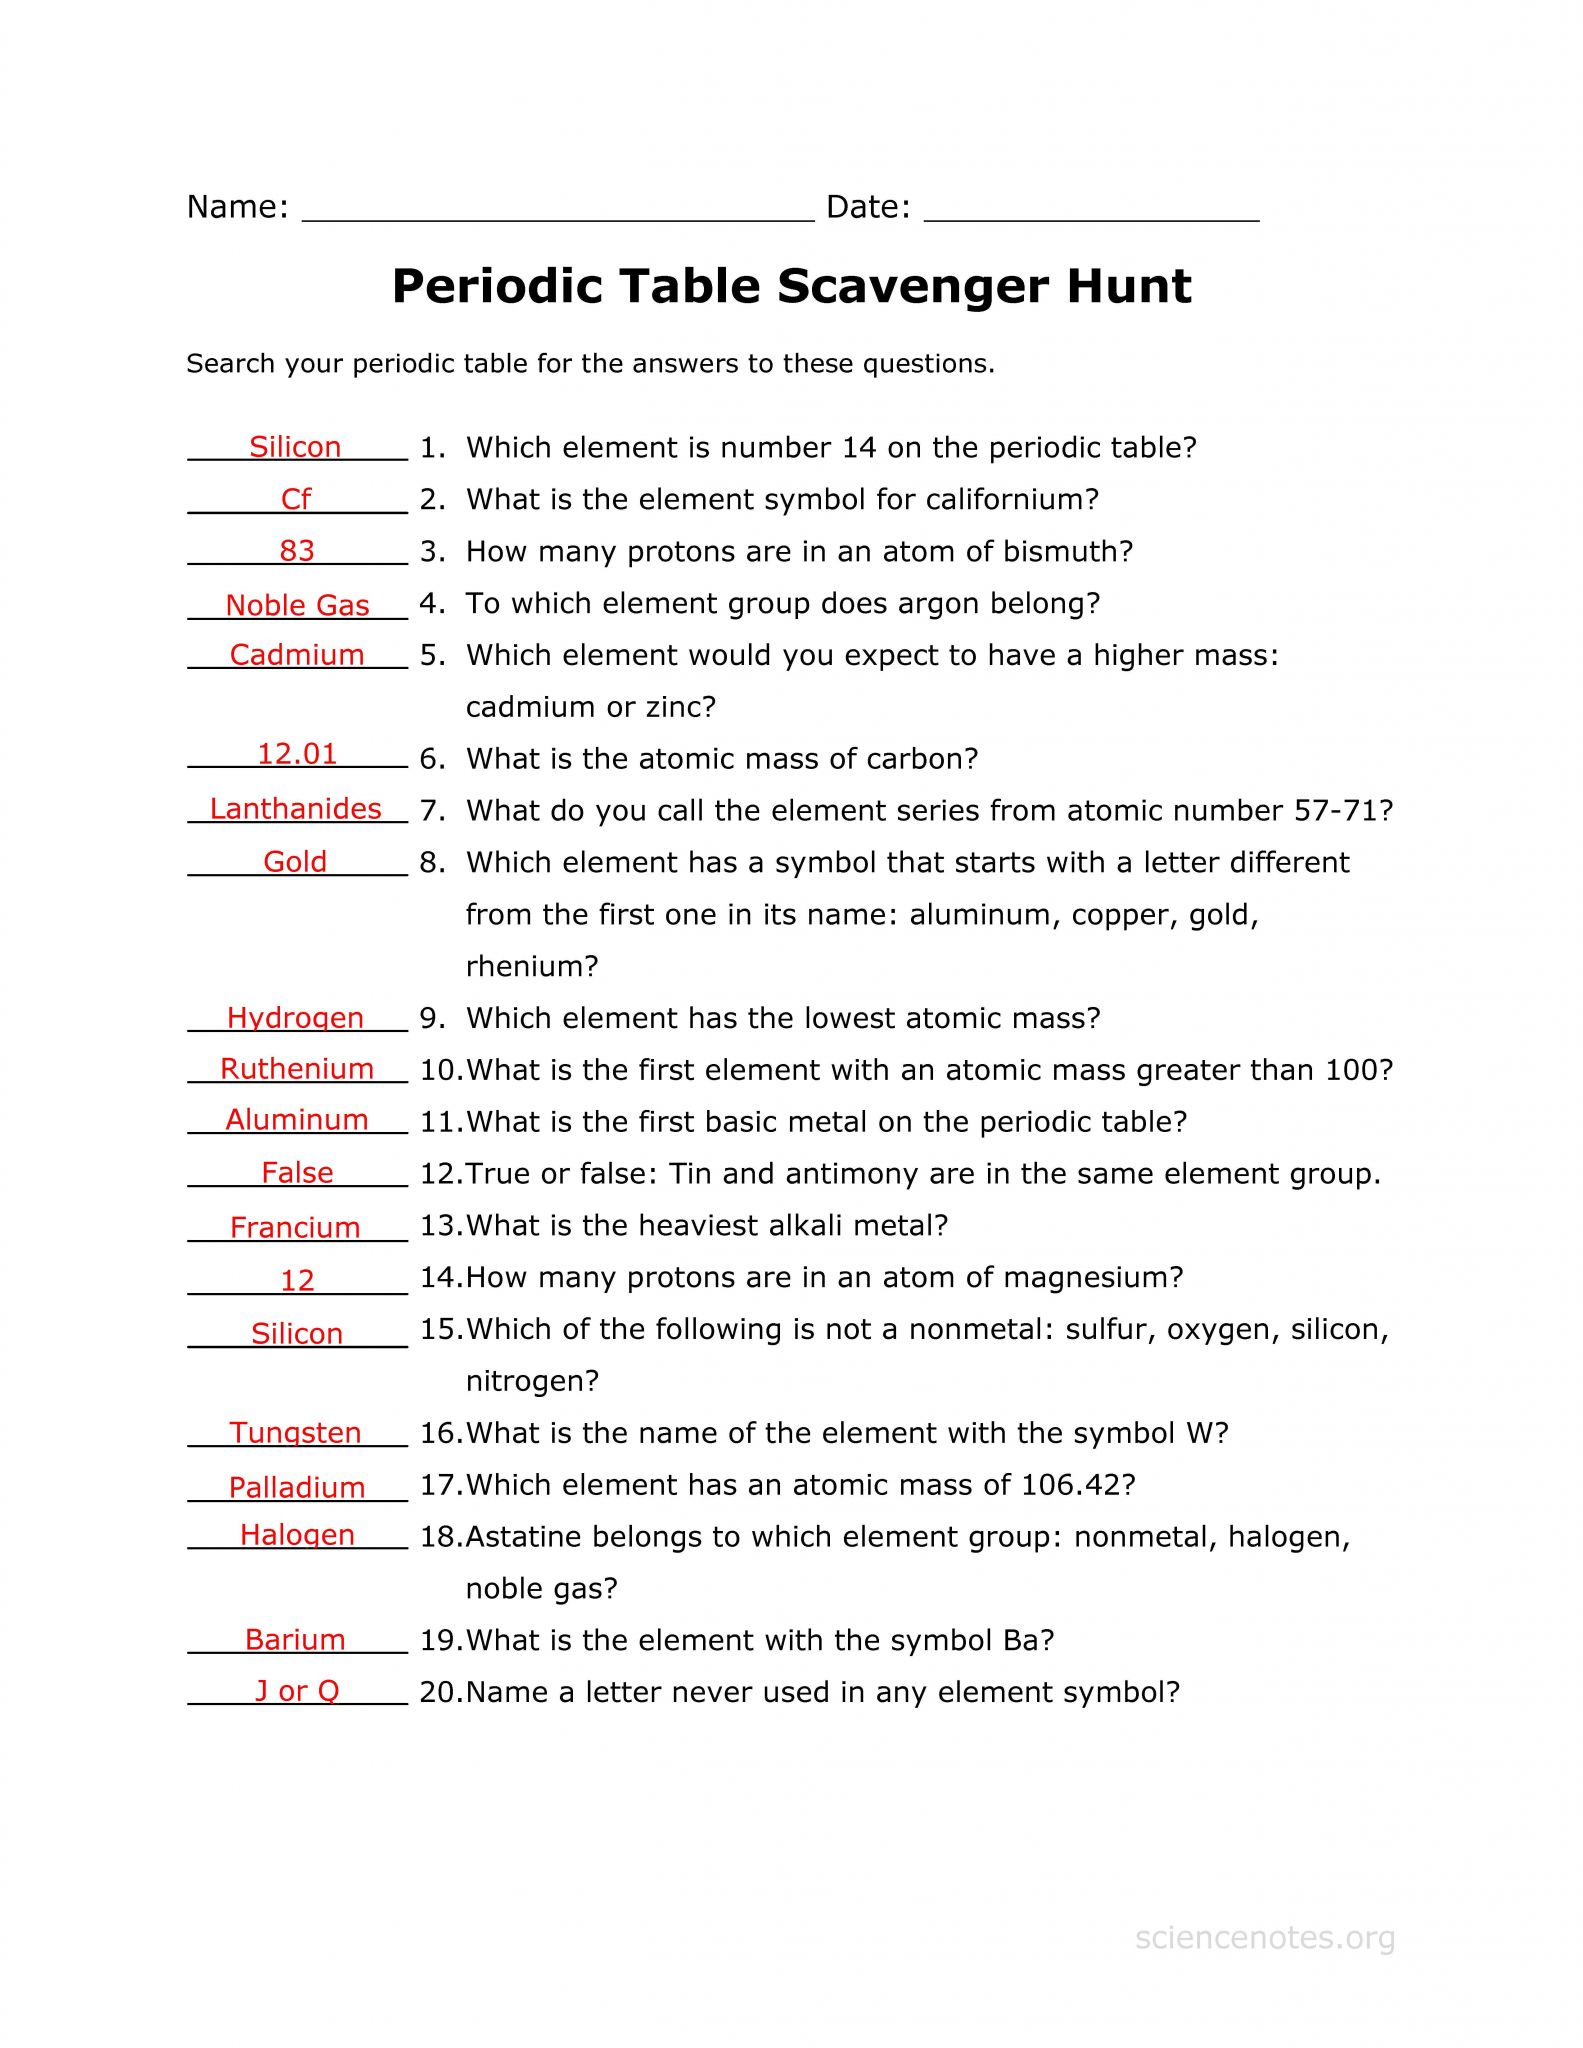 Forces Worksheet 1 Answer Key with Answer Key to the Periodic Table Scavenger Hunt Worksheet Related